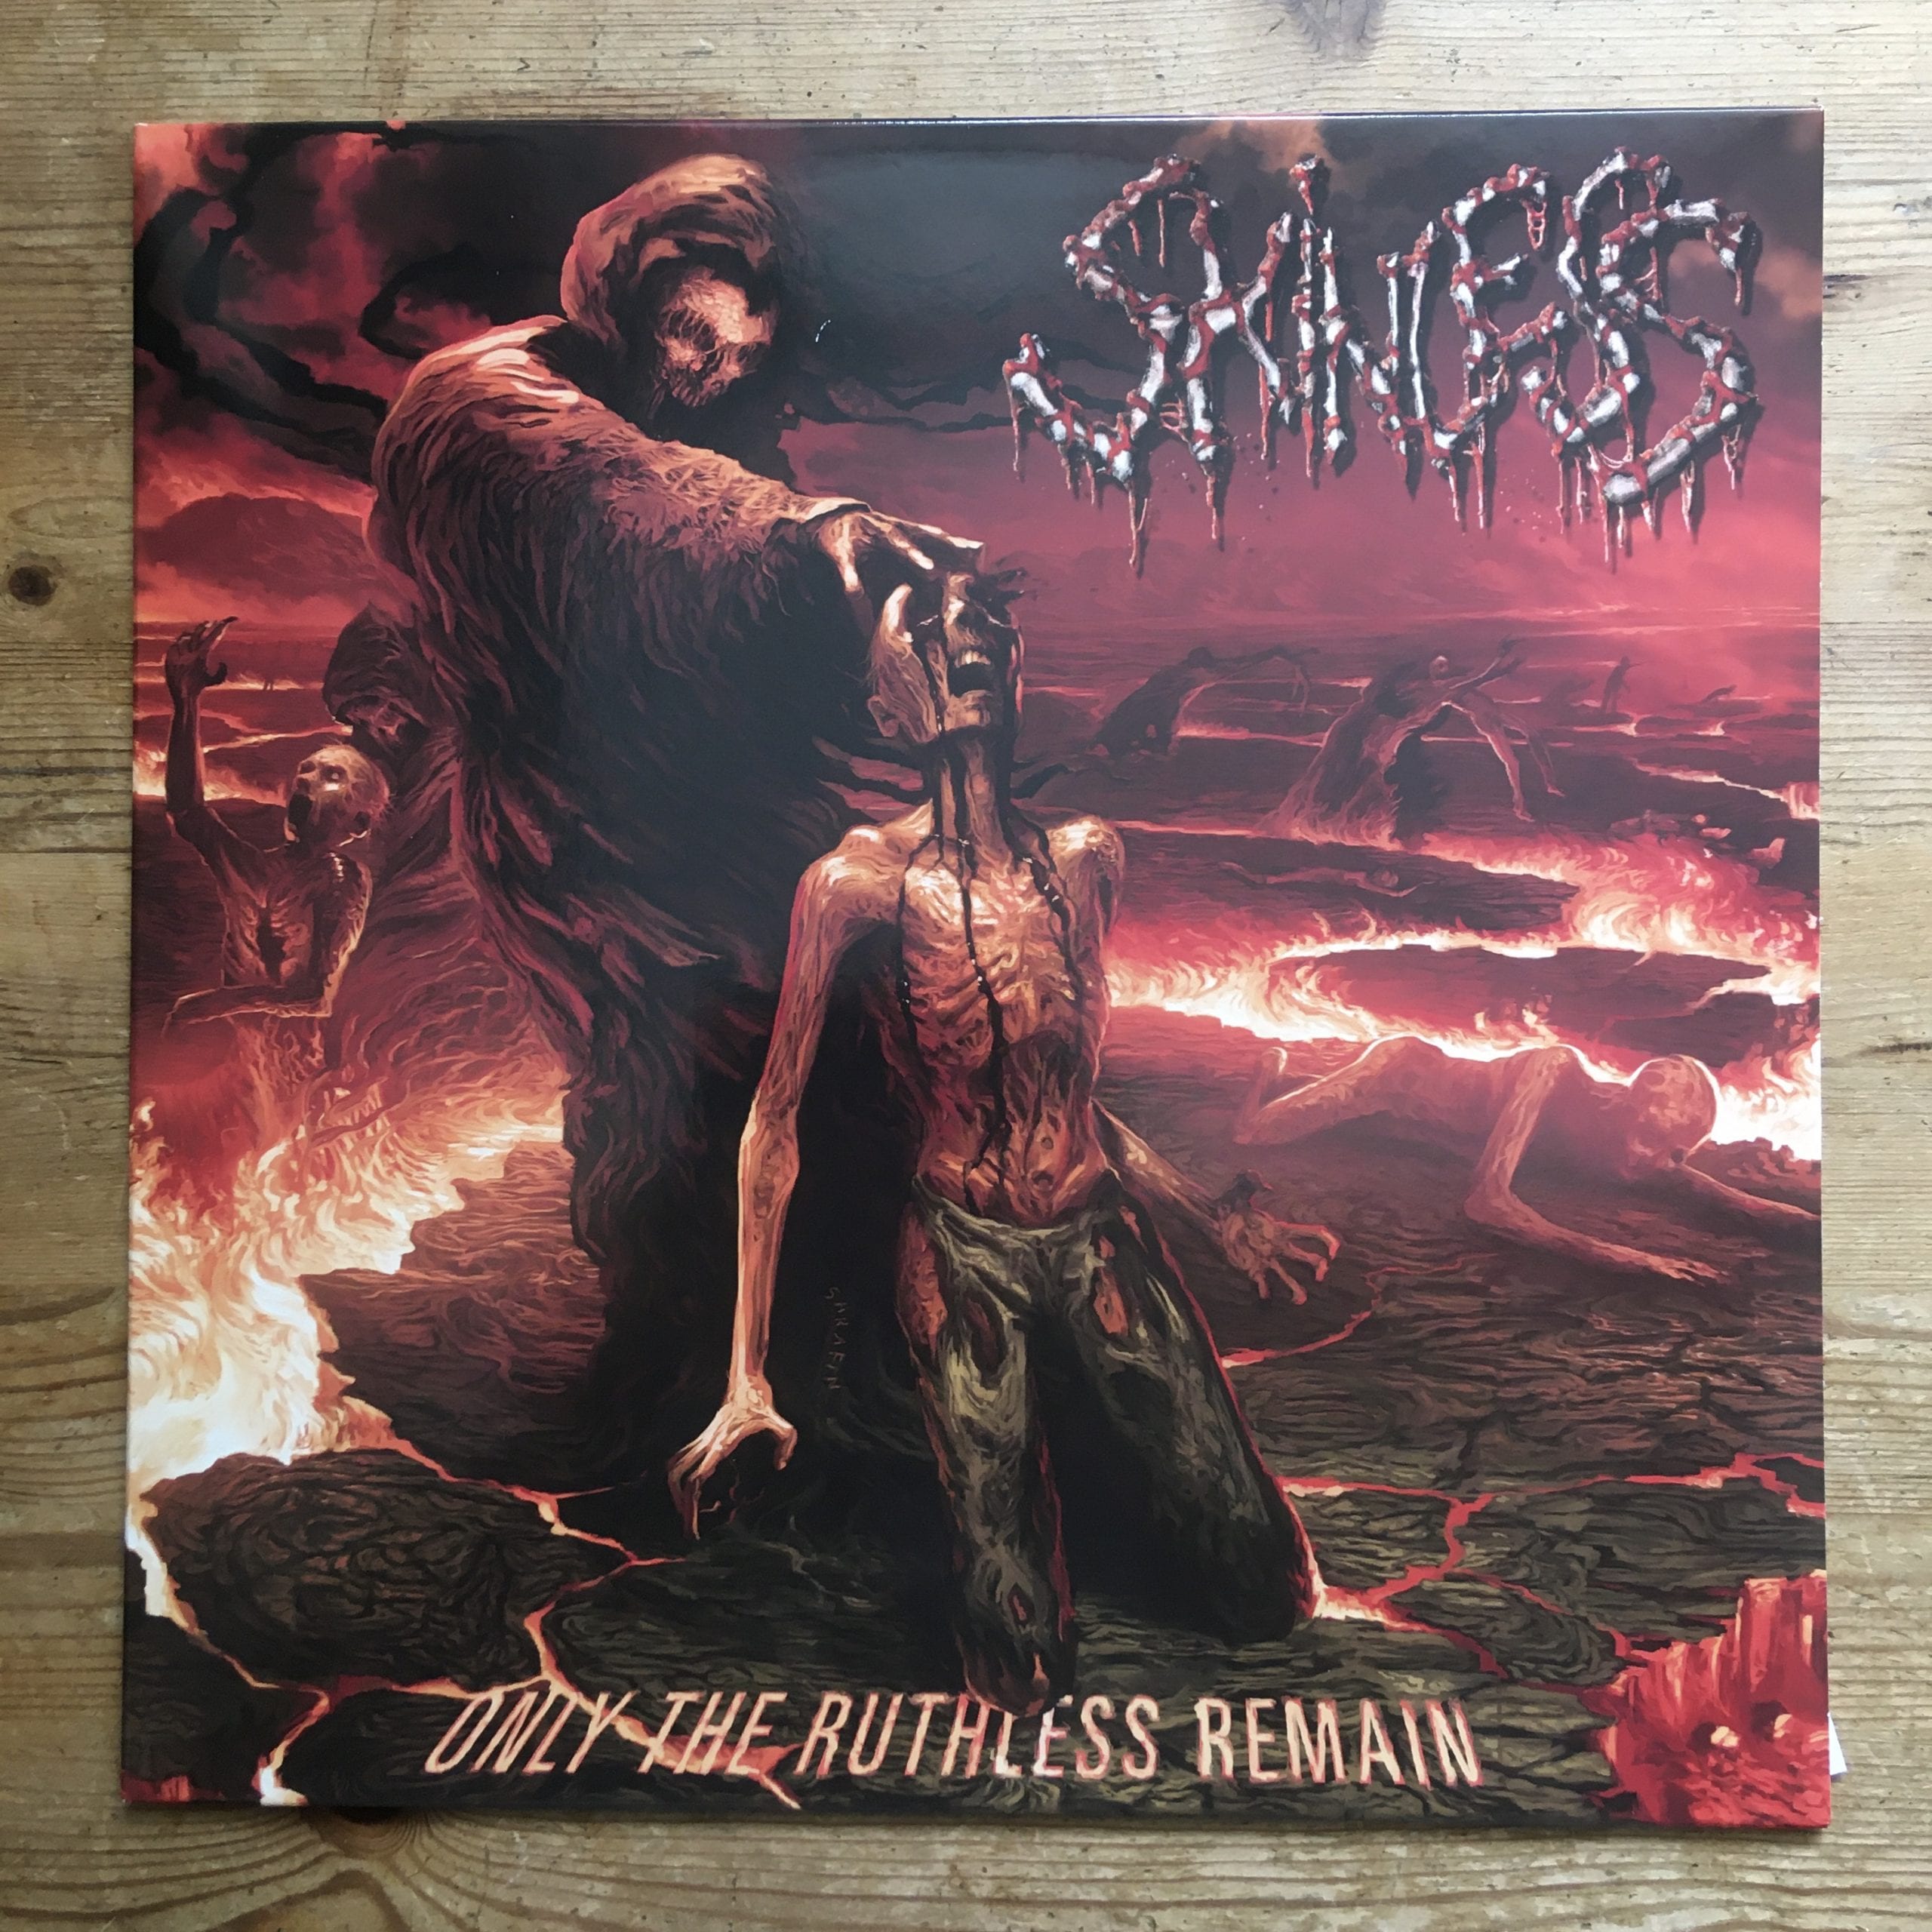 Photo of the Skinless - 